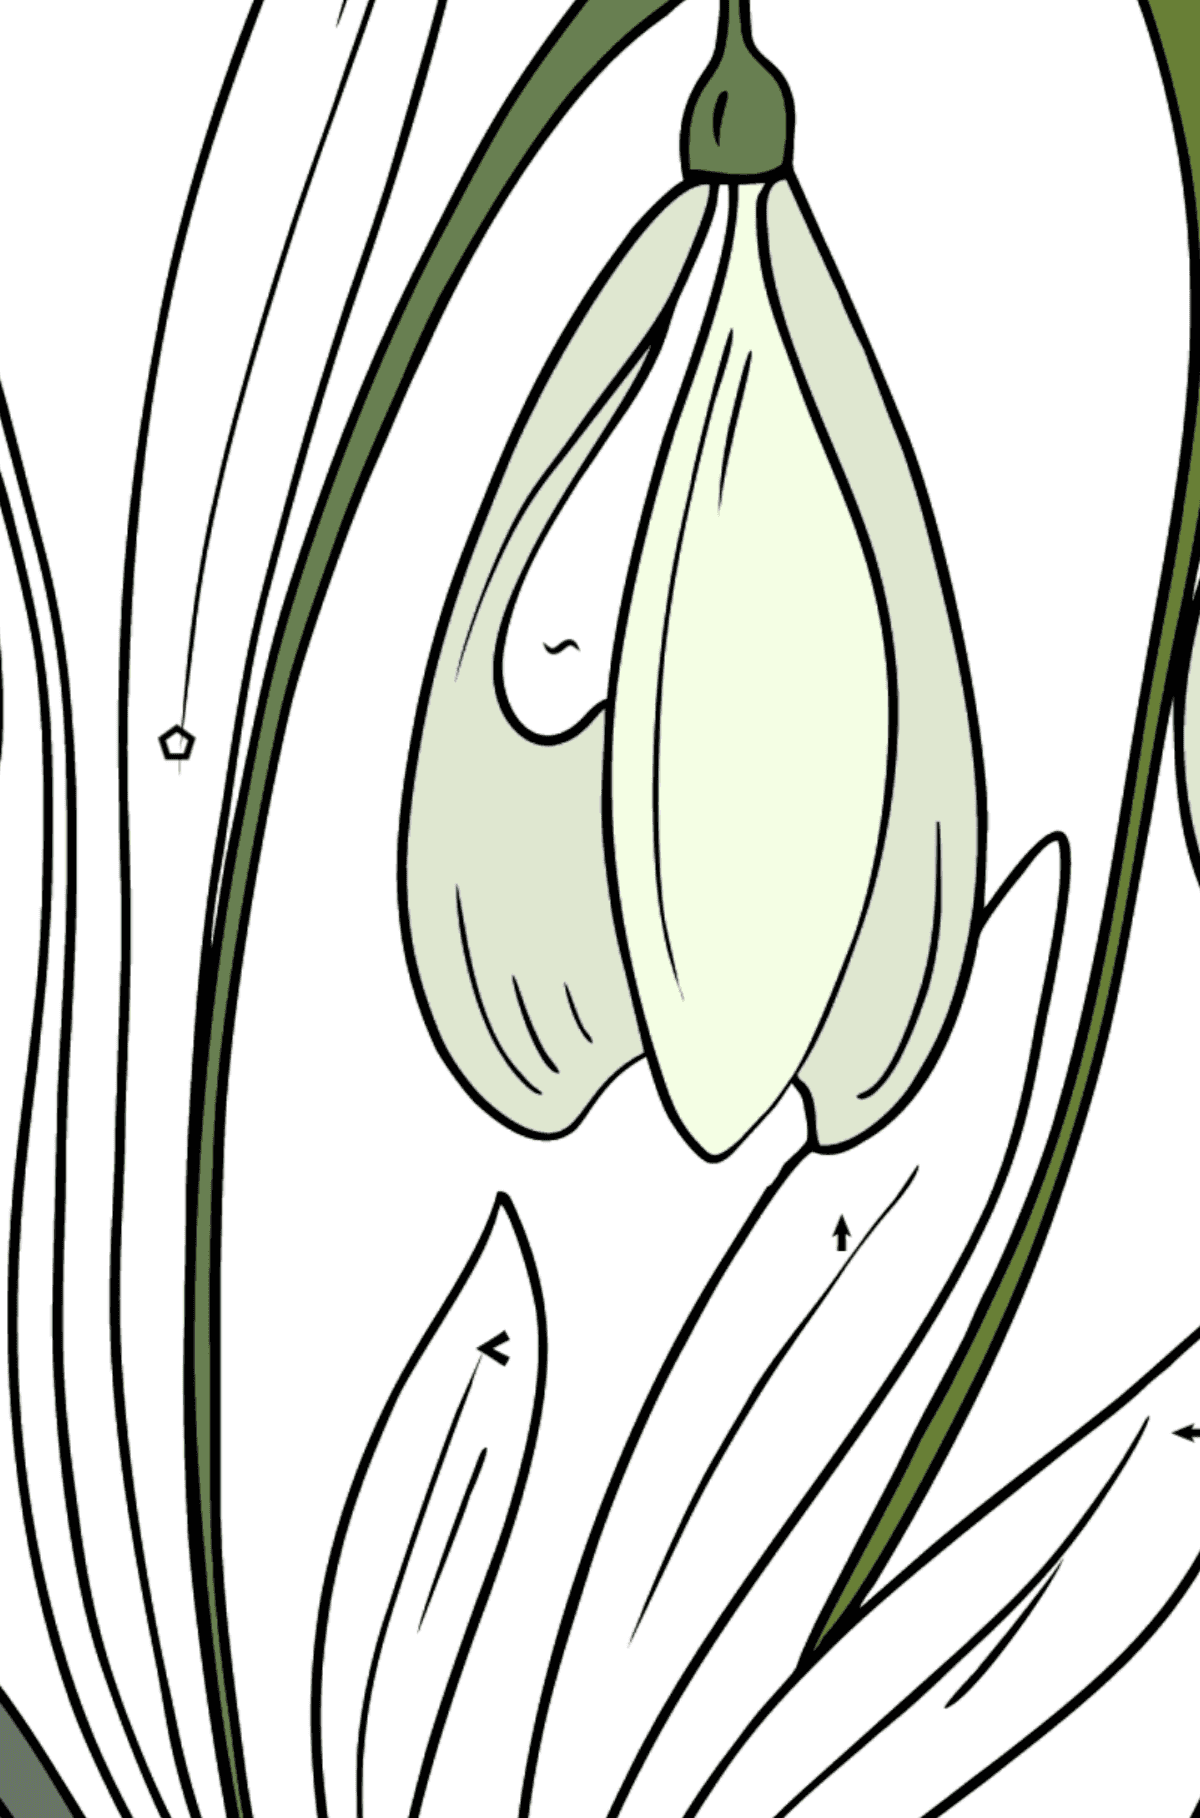 Snowdrops Coloring Page - Coloring by Symbols and Geometric Shapes for Kids